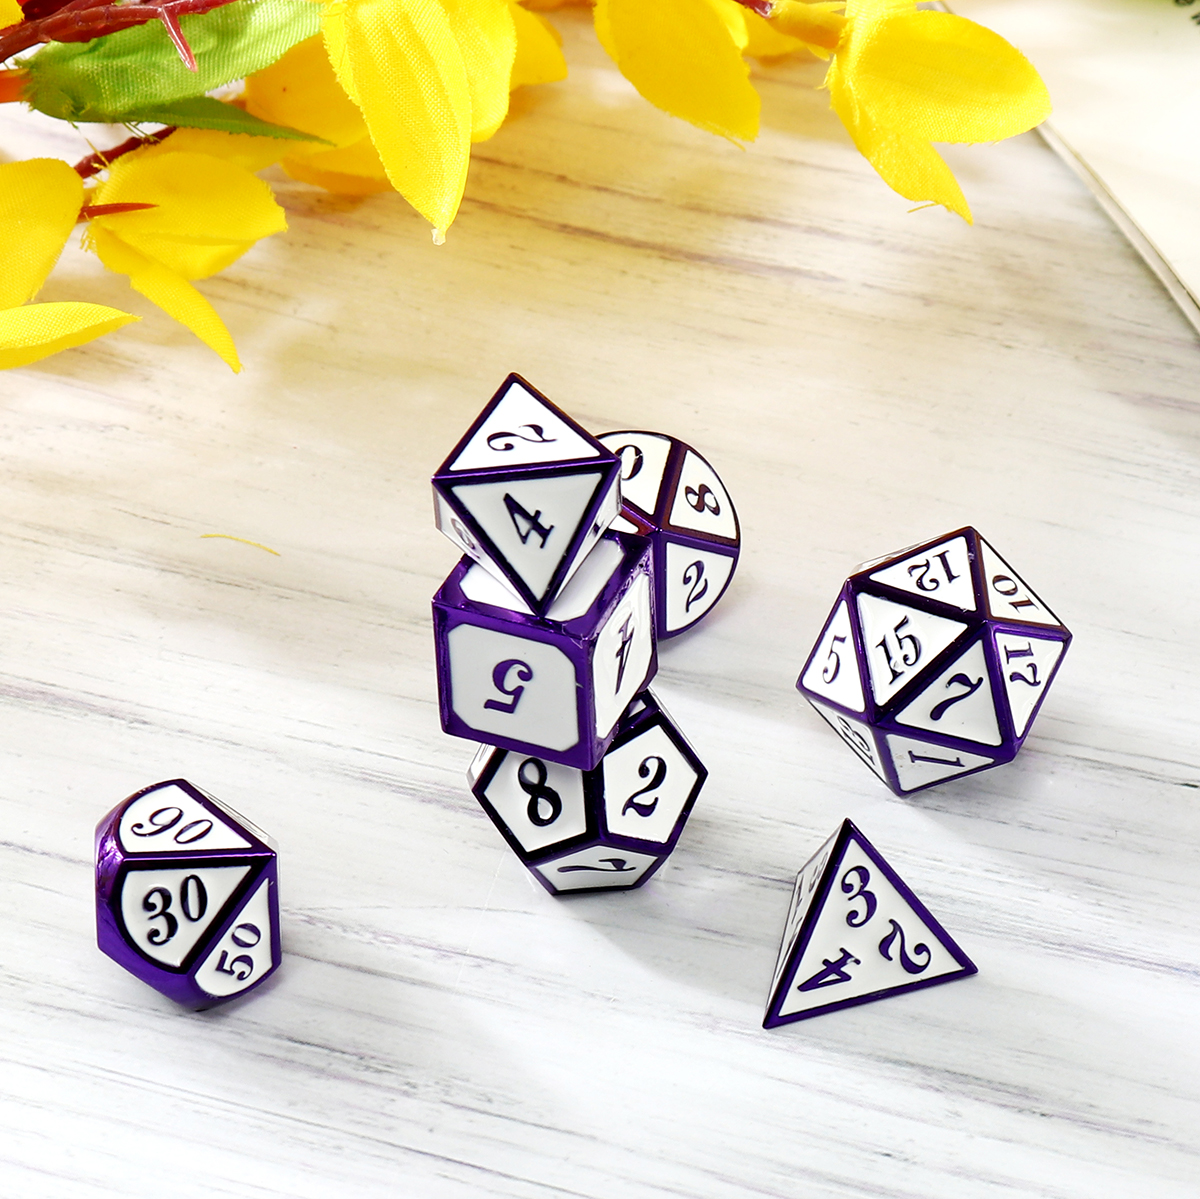 7PCS-Metal-Polyhedral-Dices-Set-For-Dungeons-and-Dragons-Dice-Desktop-Table-RPG-Game-1633181-3